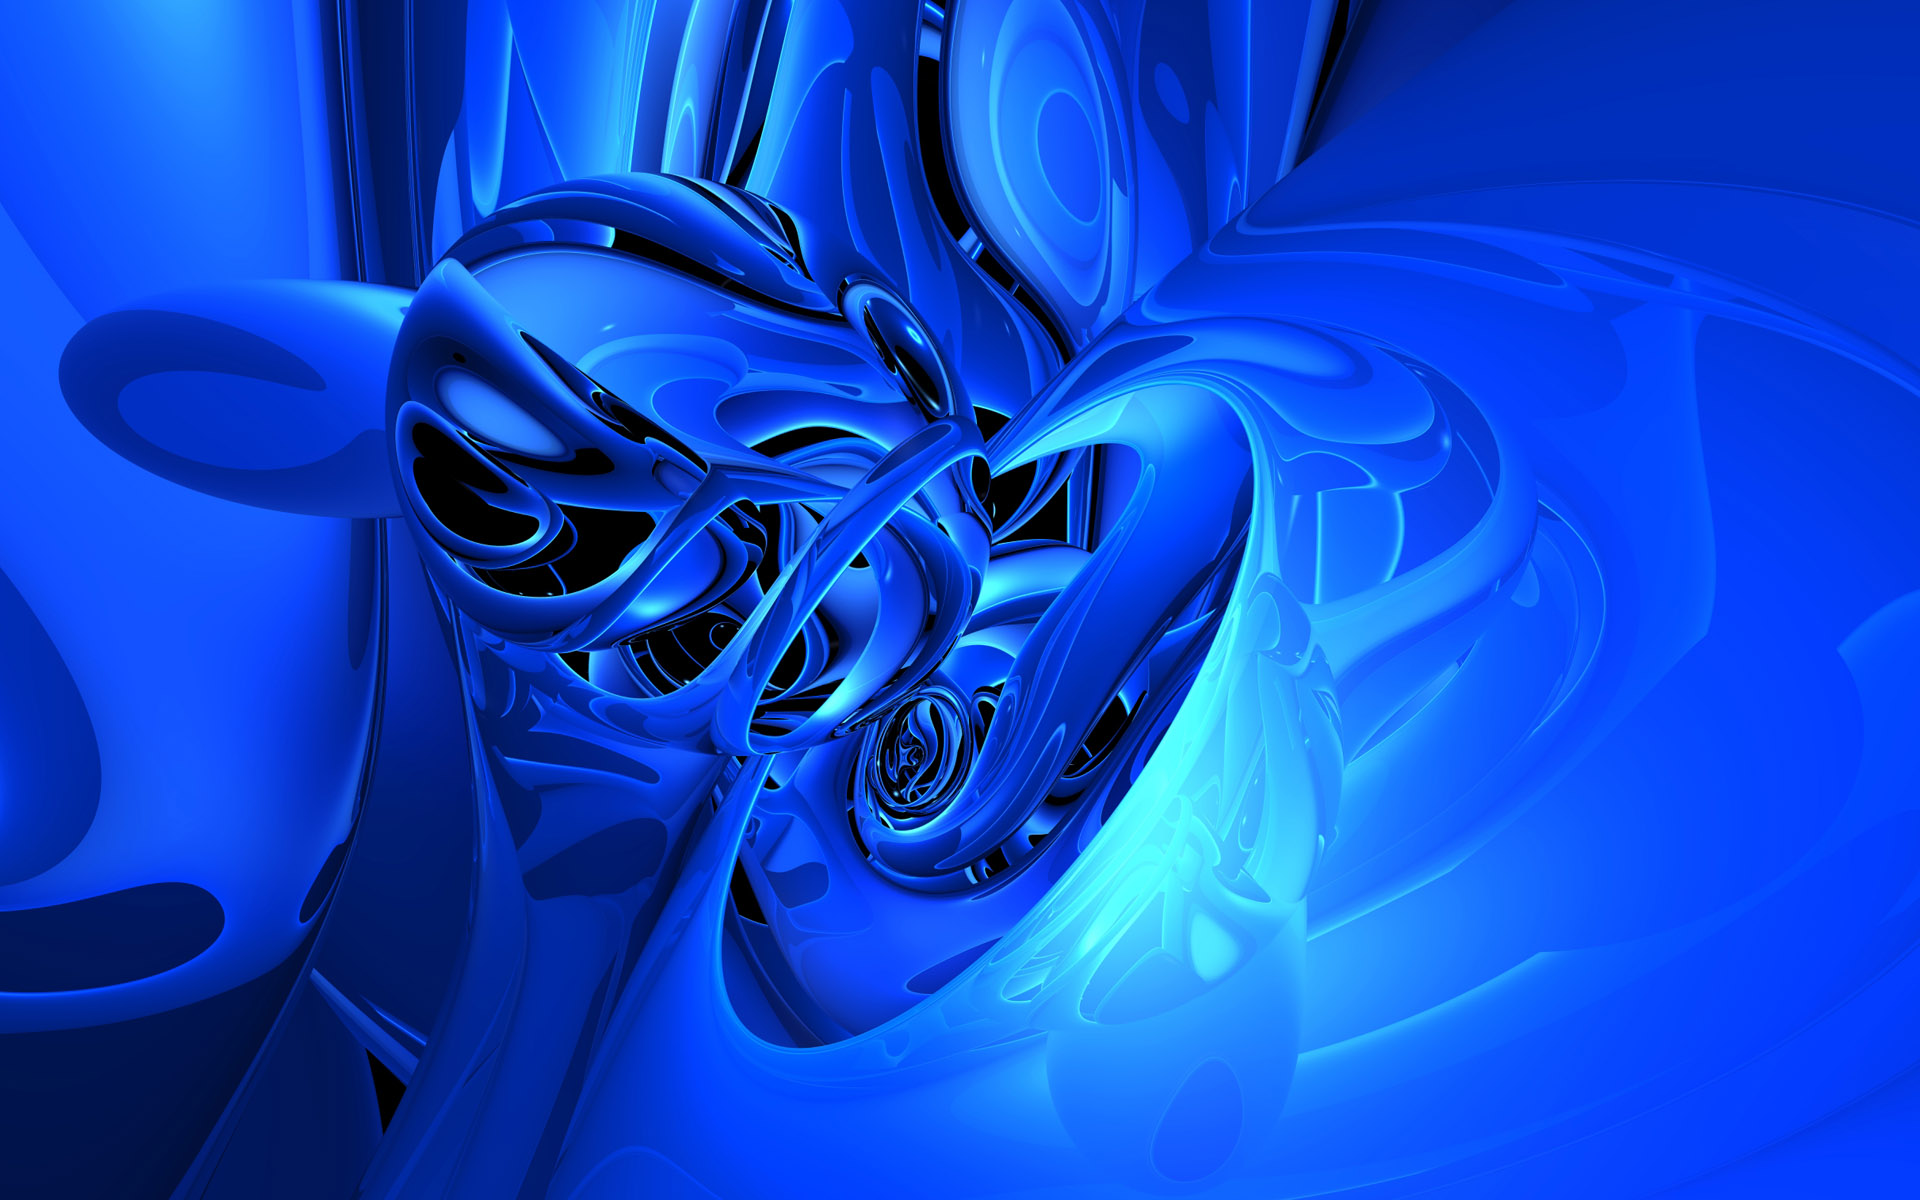 Blue Abstract wallpaper Wallpapers   1920x1200   362314